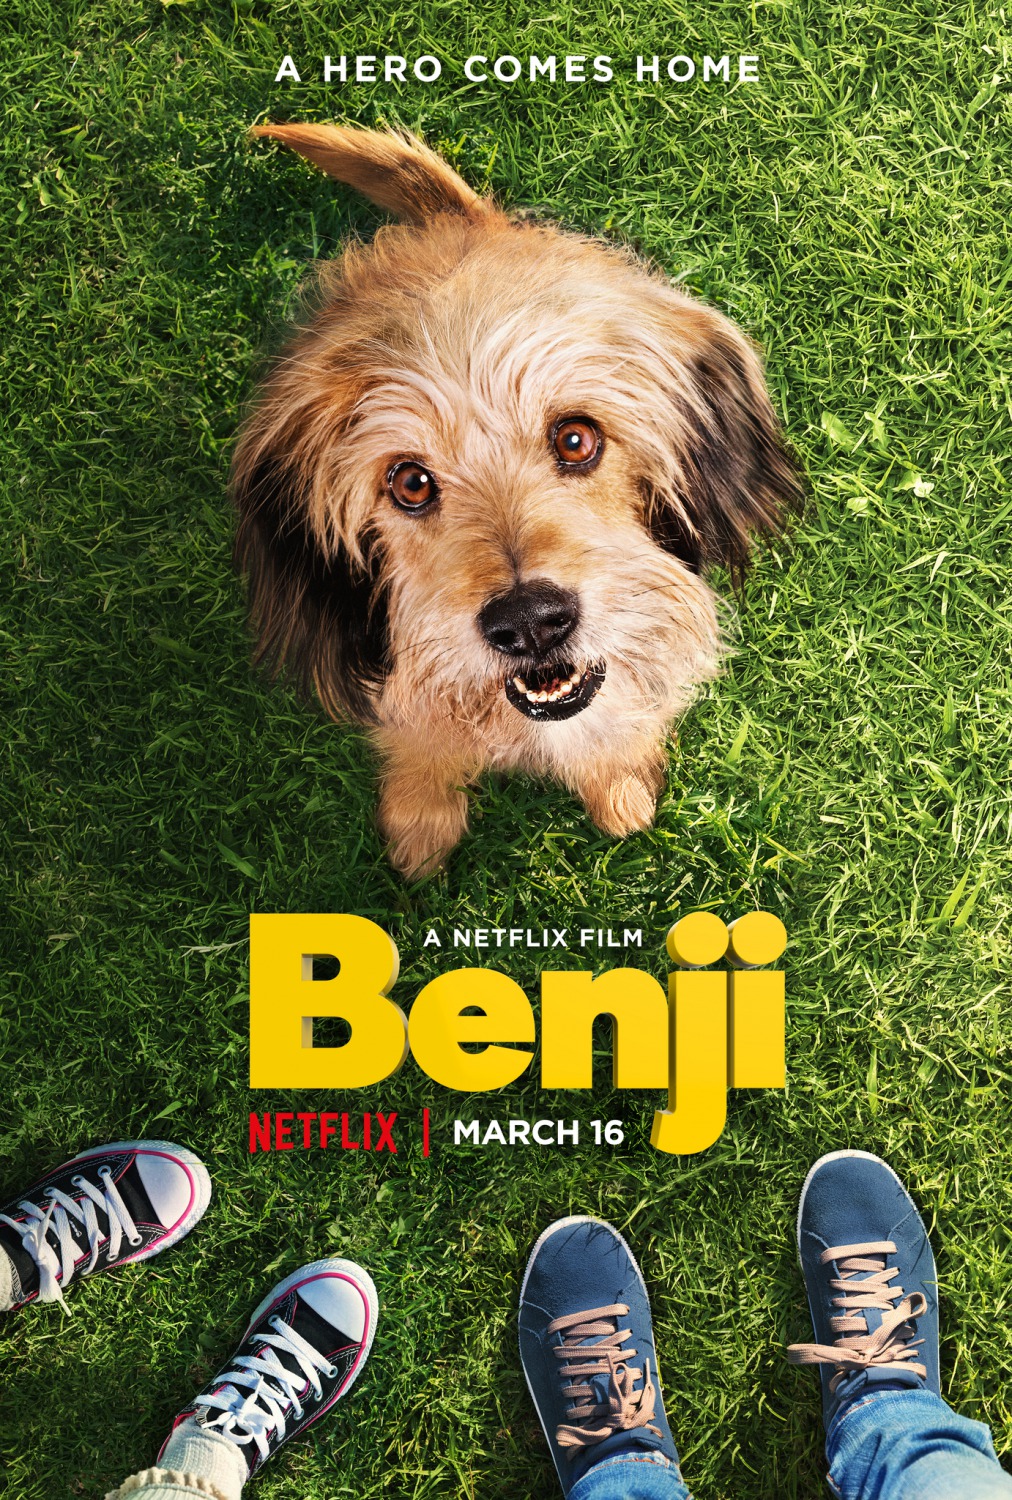 Extra Large TV Poster Image for Benji 